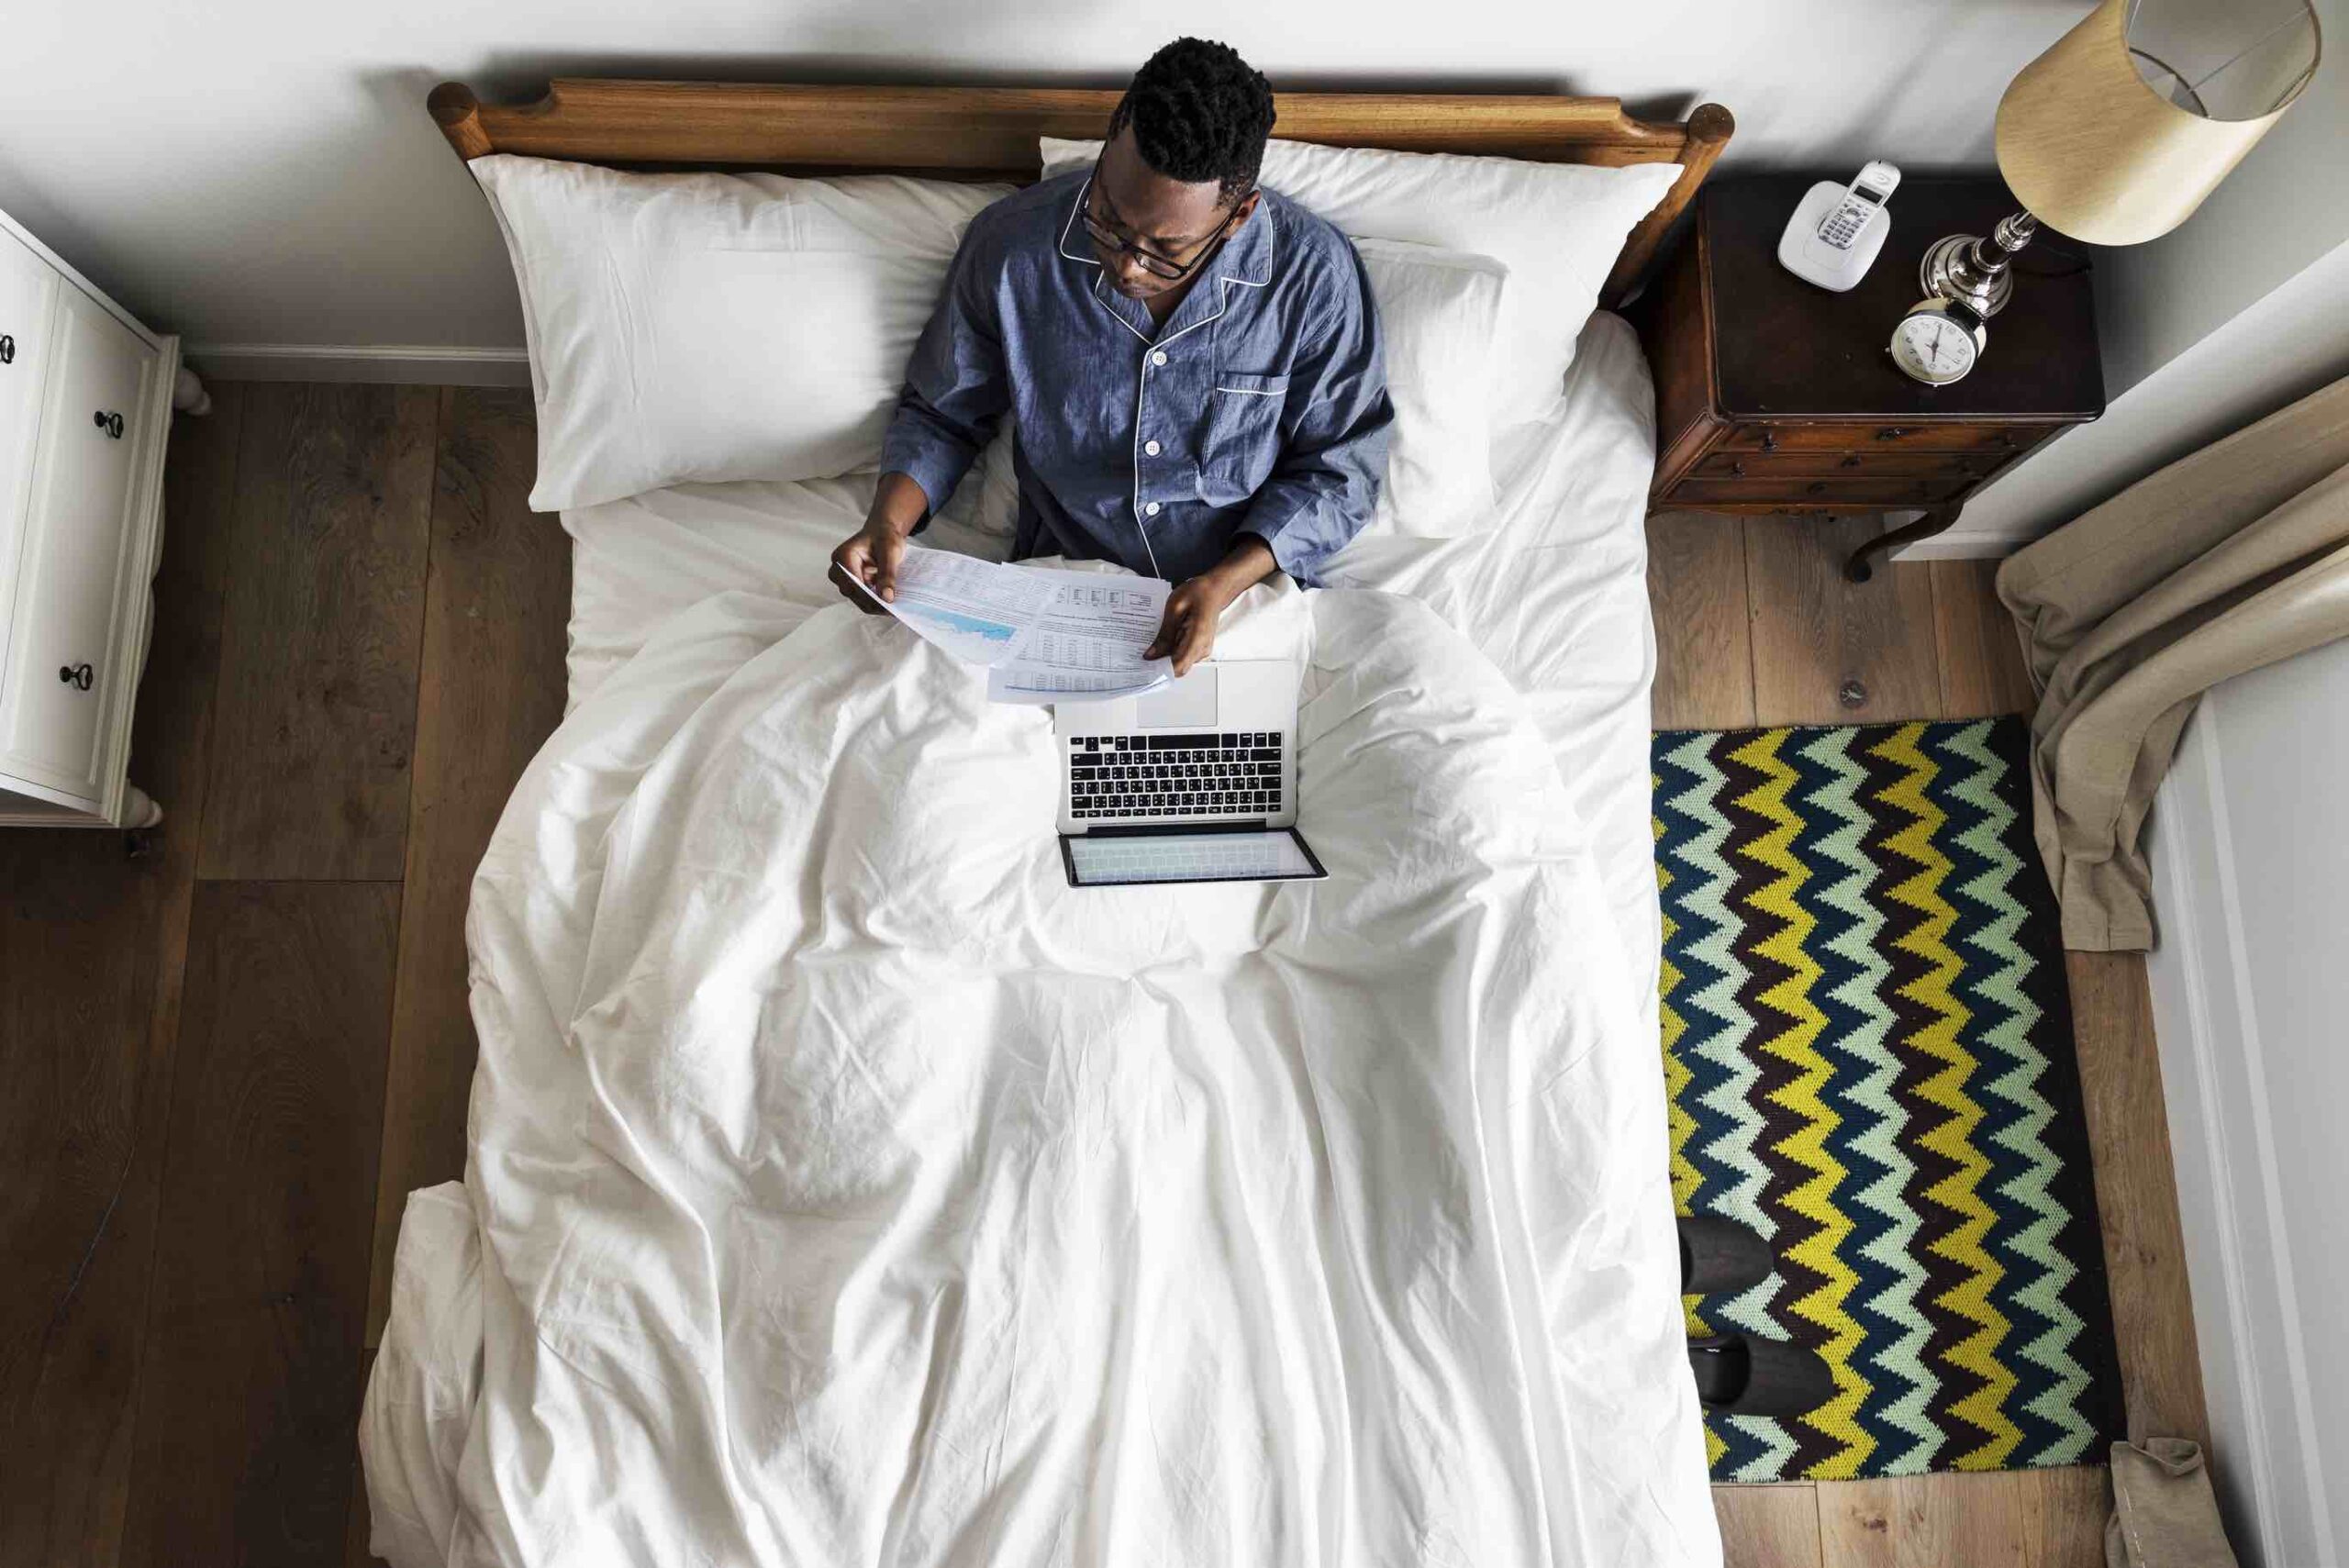 A man in a bed working on his laptop.